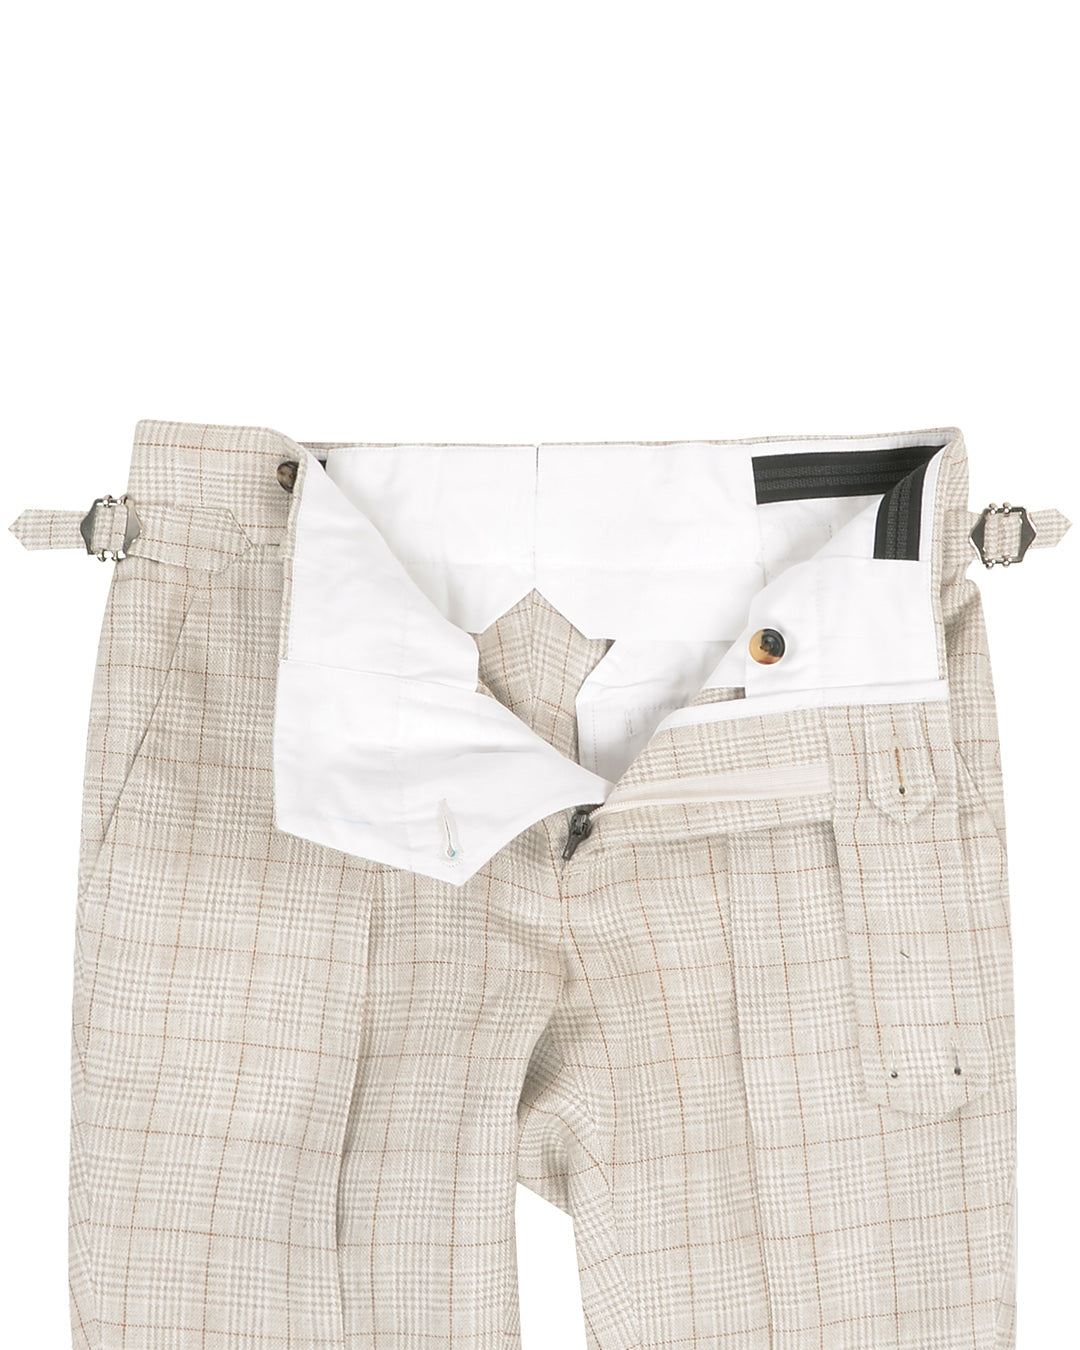 Openview of custom linen pants for men by Luxire in light tan plaid